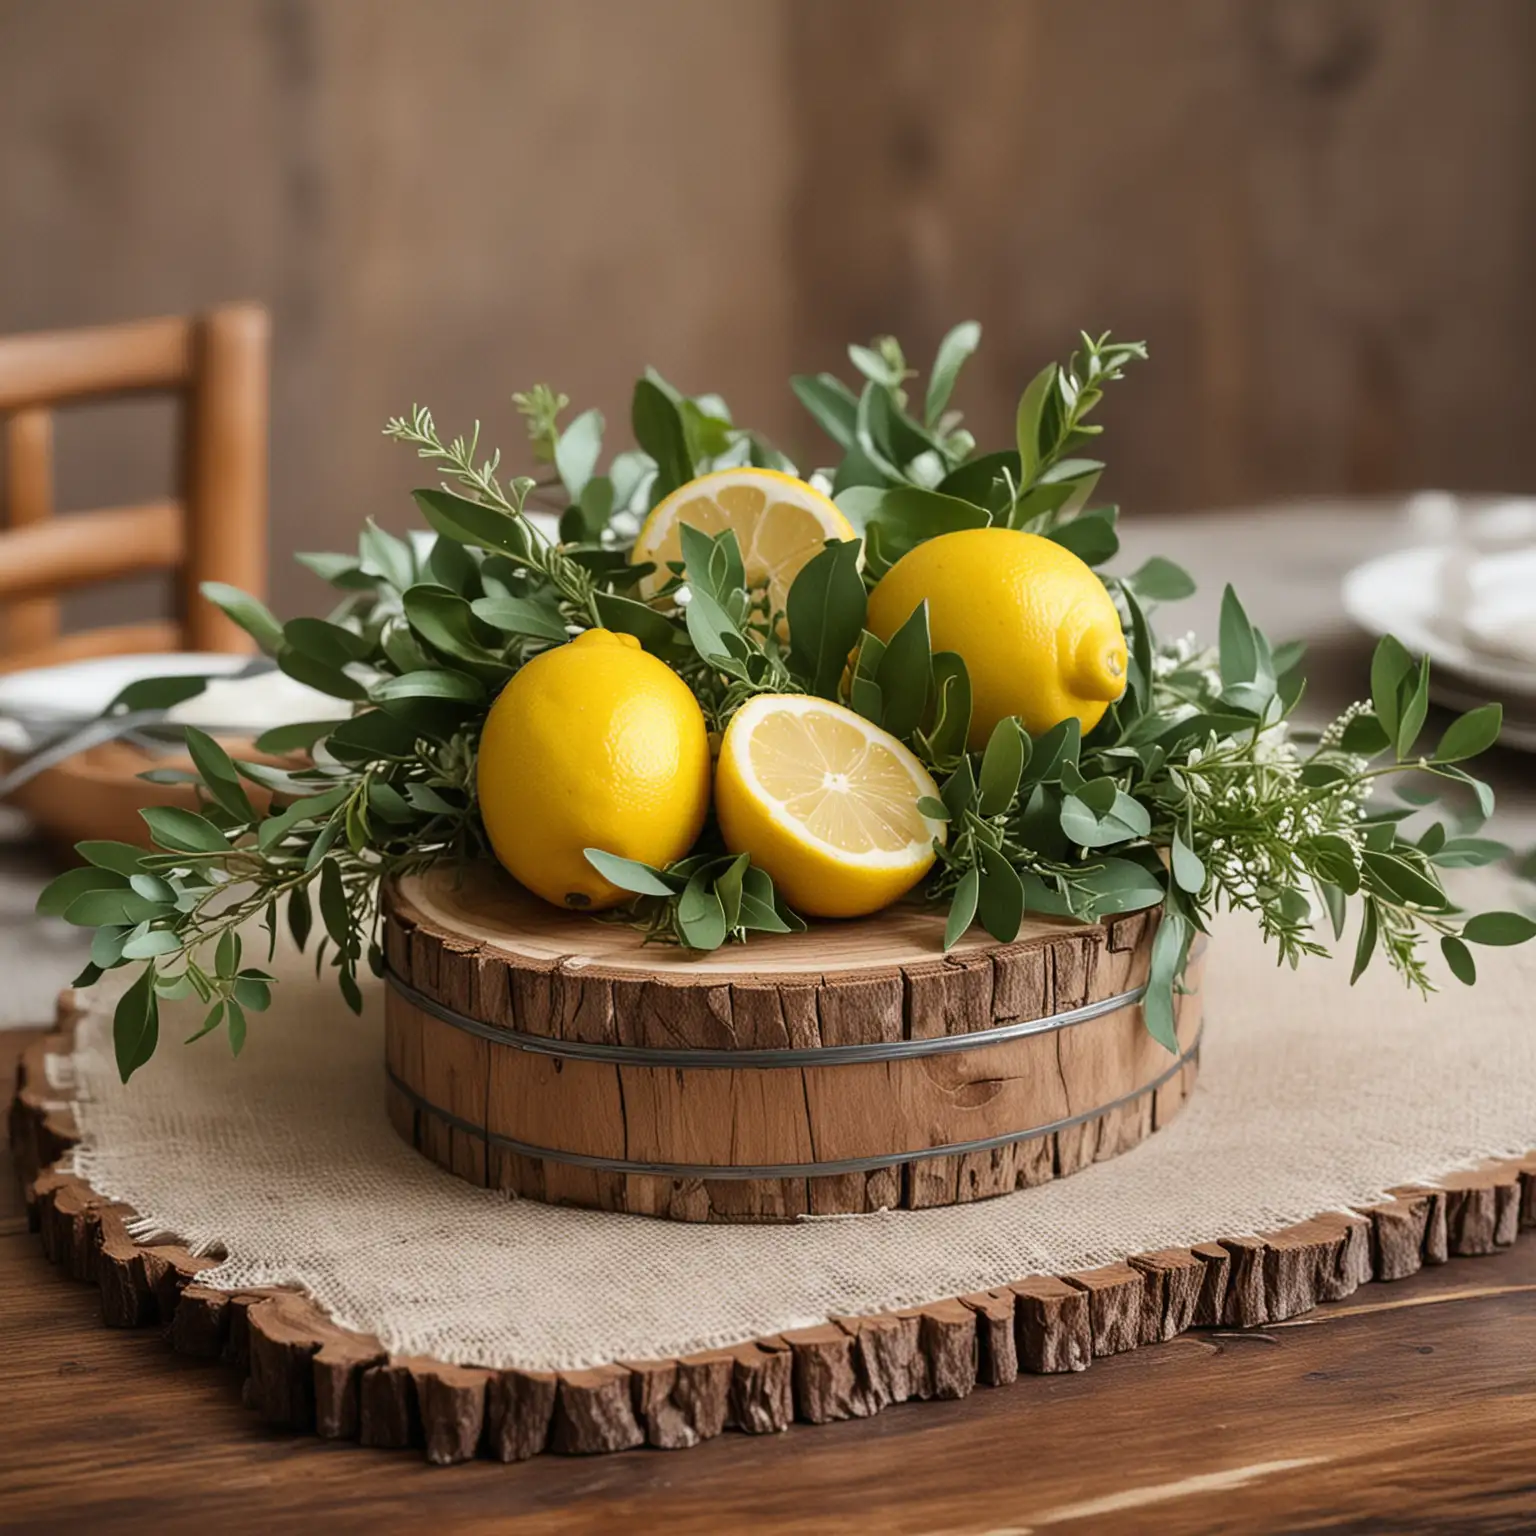 Rustic-Wedding-Centerpiece-with-Wood-Slice-Lemons-and-Greenery